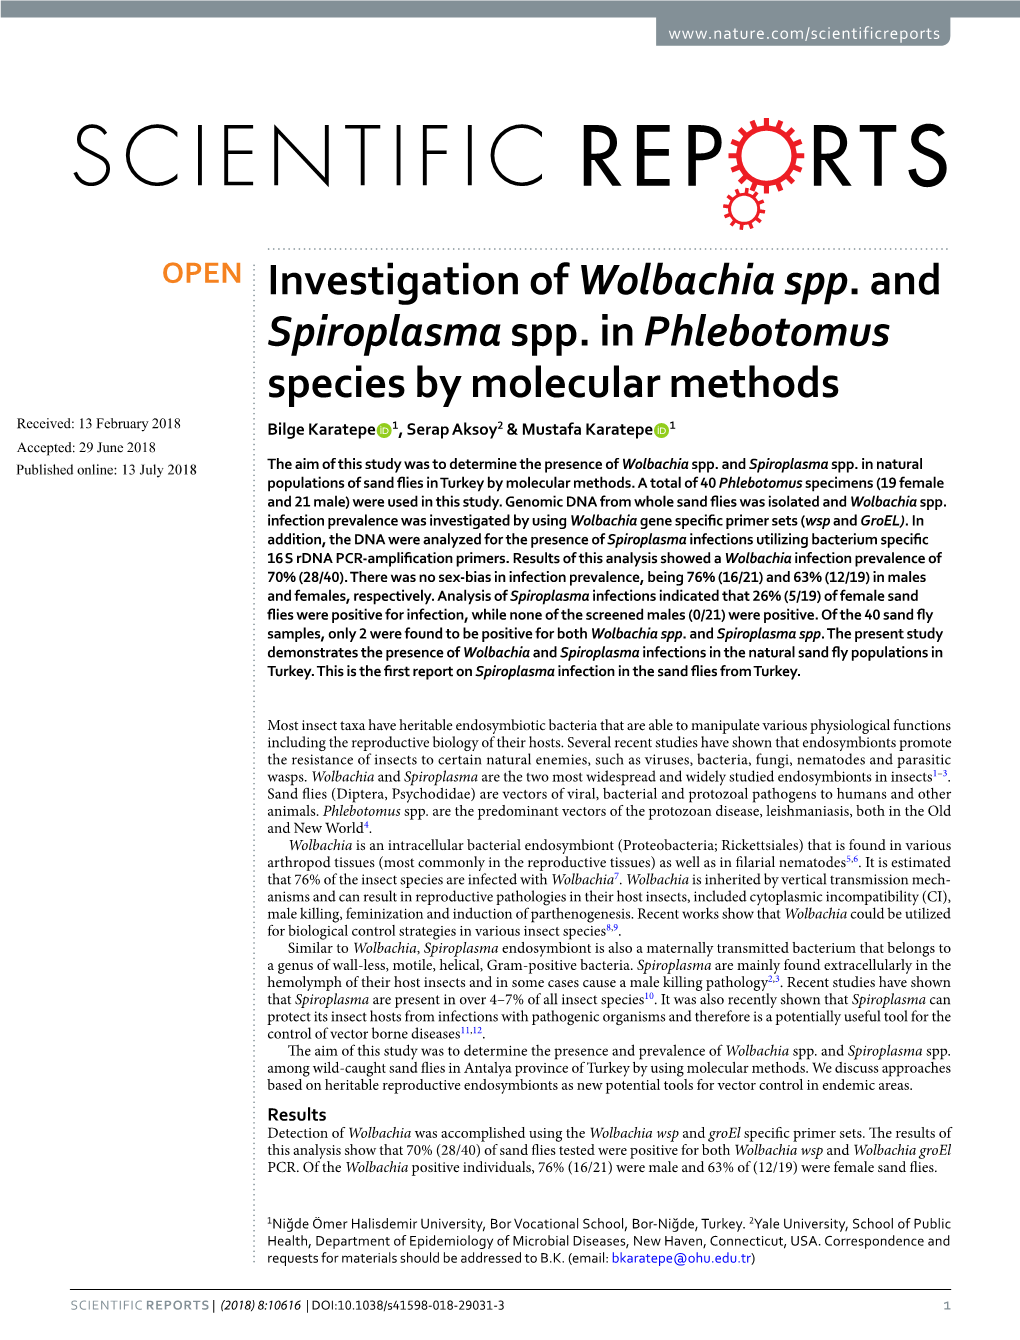 Investigation of Wolbachia Spp. and Spiroplasma Spp. in Phlebotomus